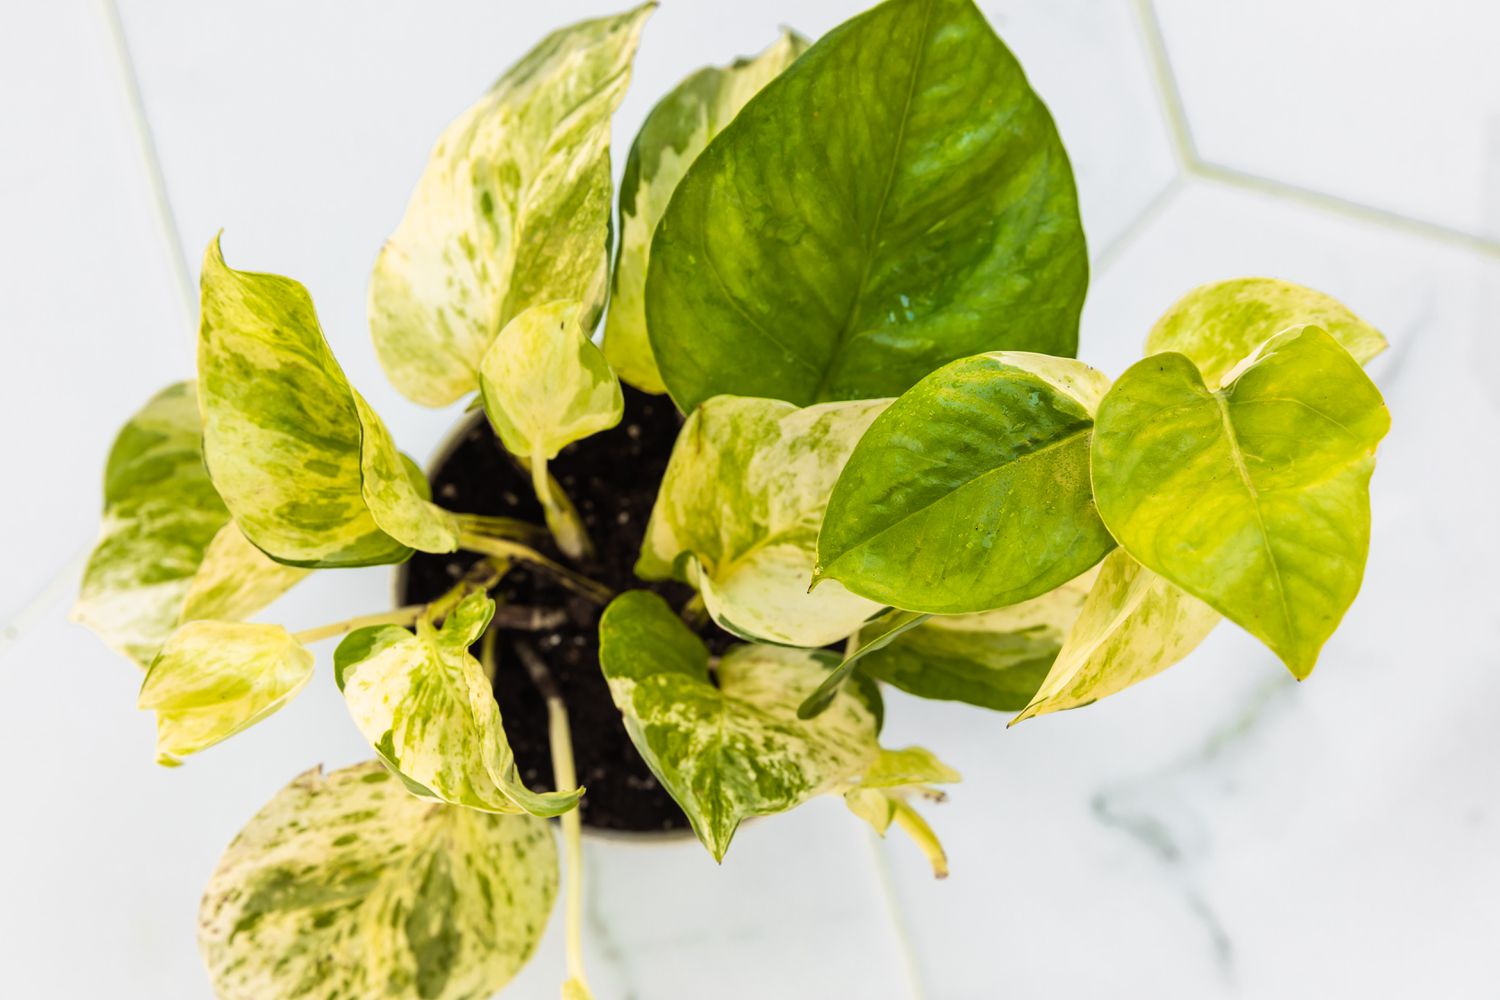 Manjula pothos plant with green and variegated leaves from above